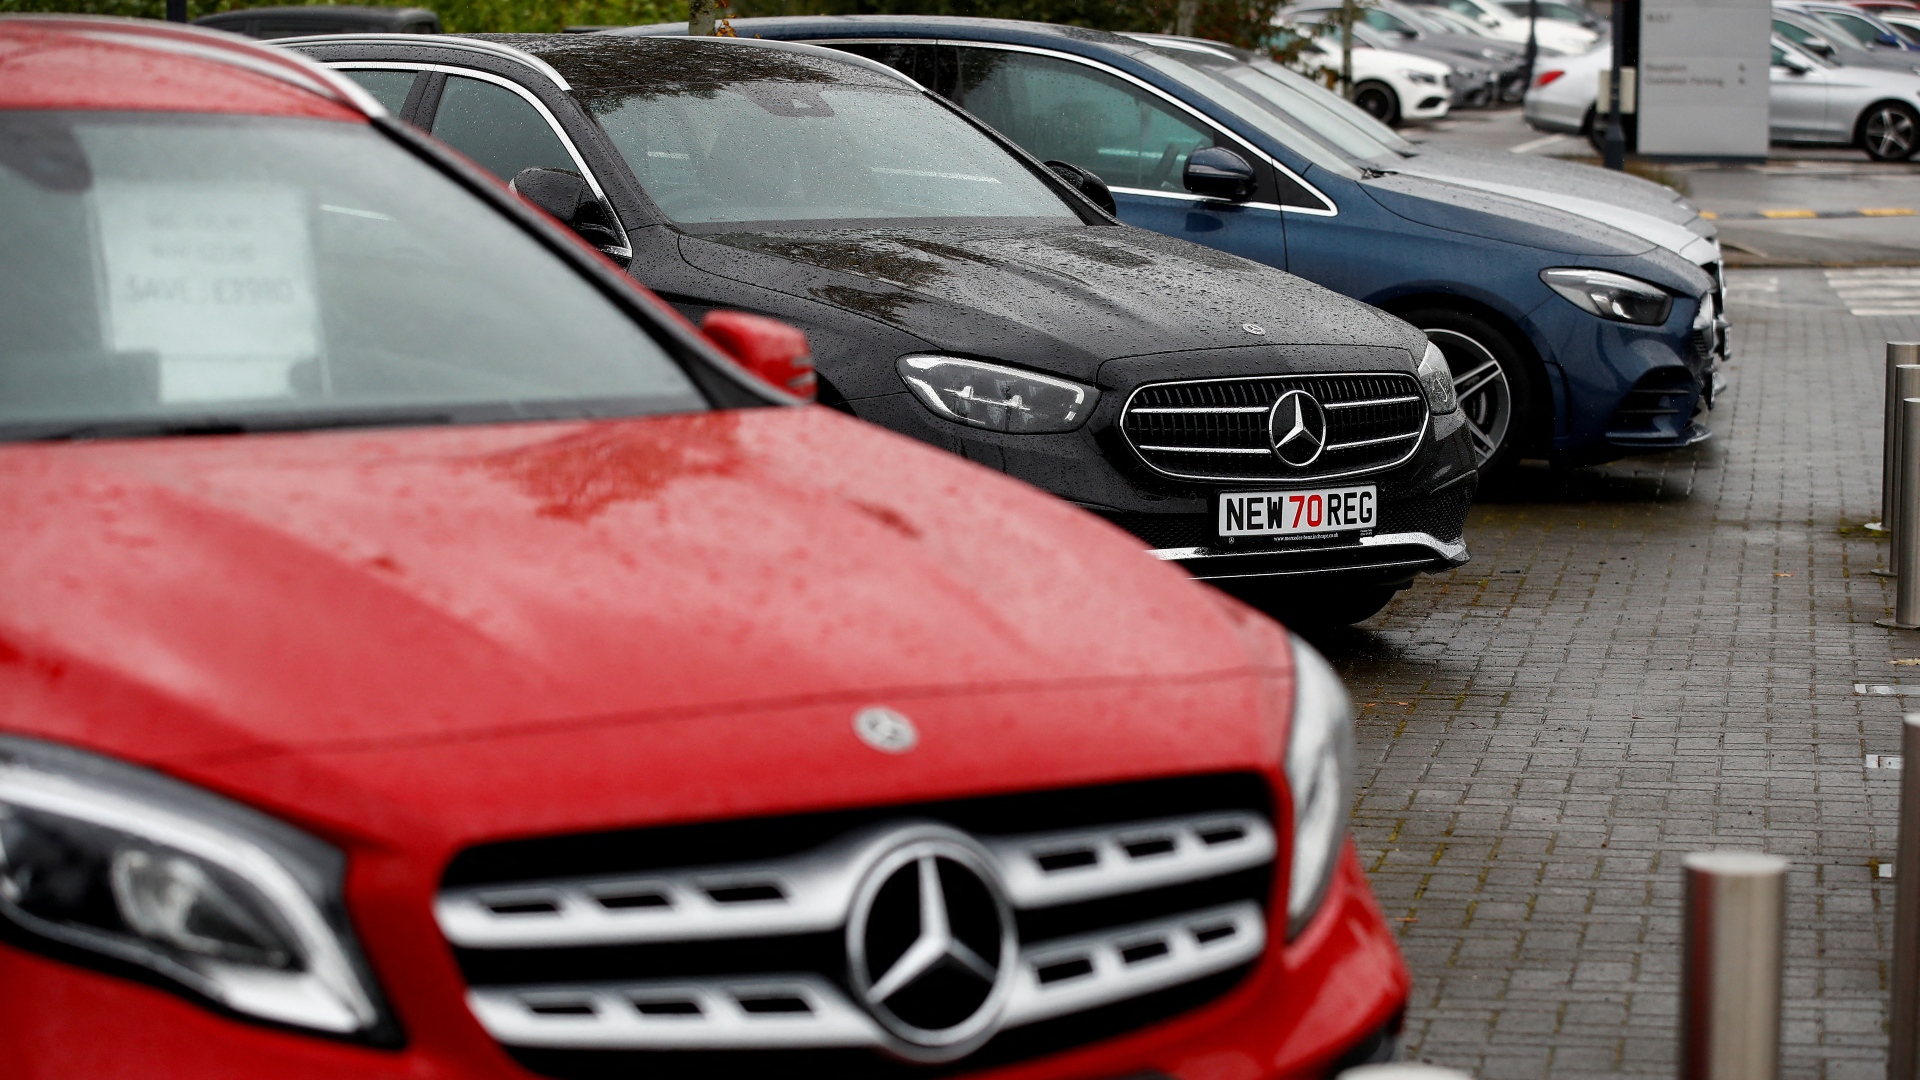 Europe's carmakers fear U.S. subsidies will inflict lasting damage